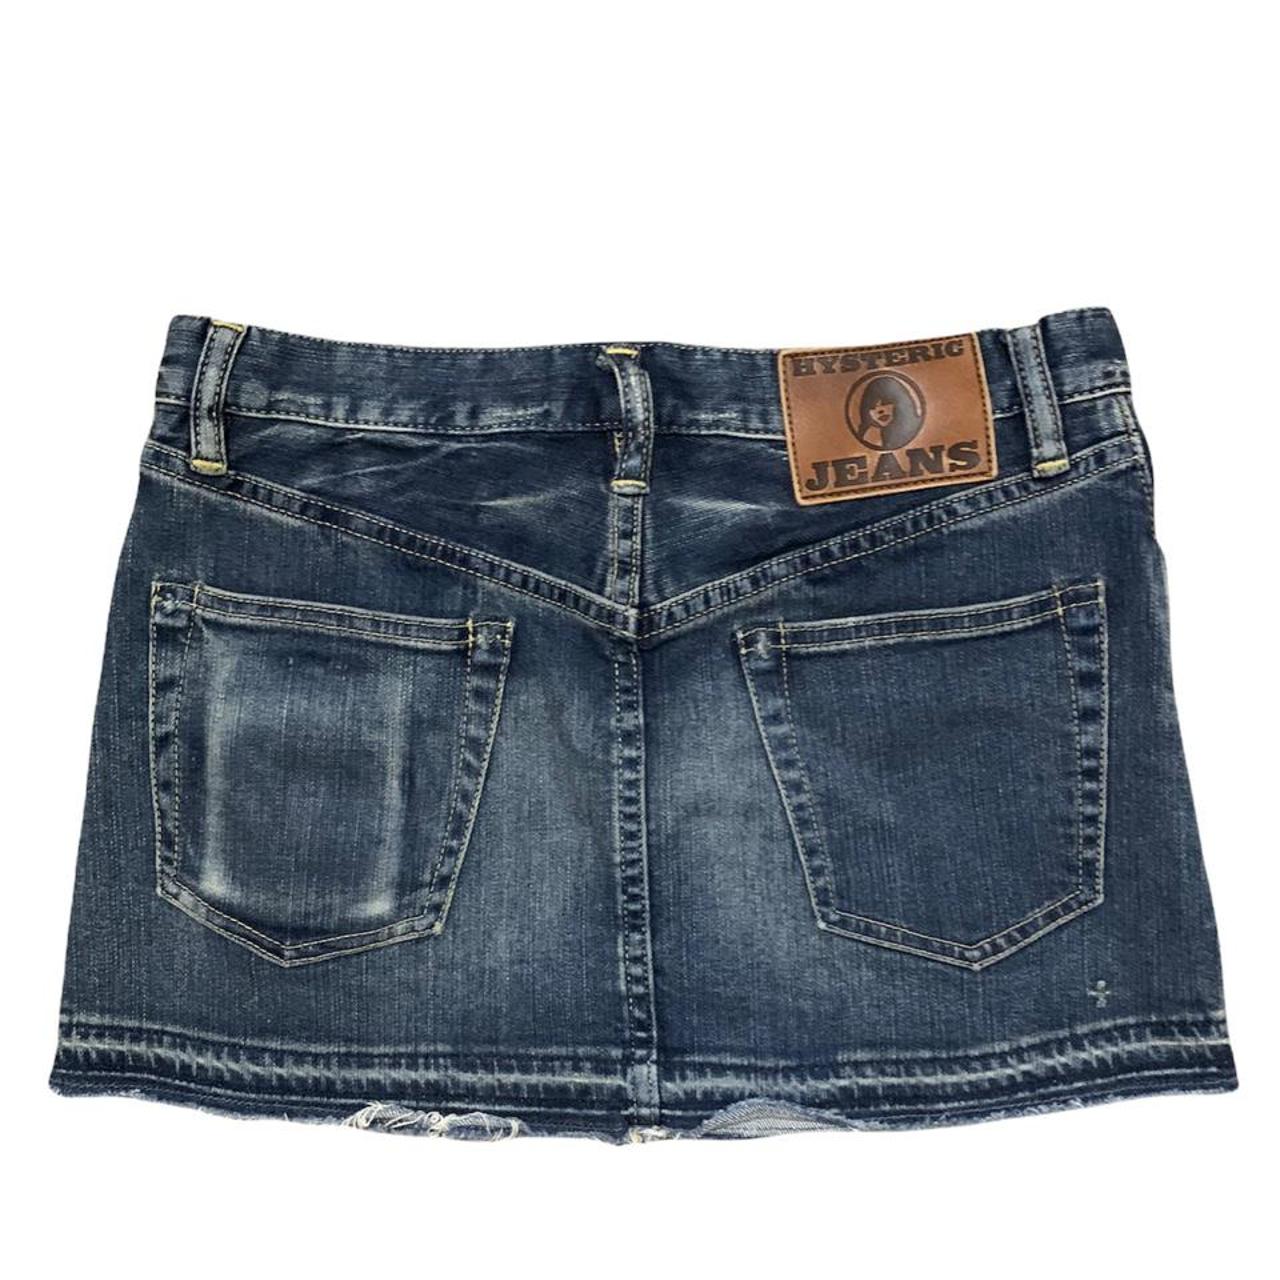 Product Image 2 - Hysteric Glamour Denim Skirt

Good Condition